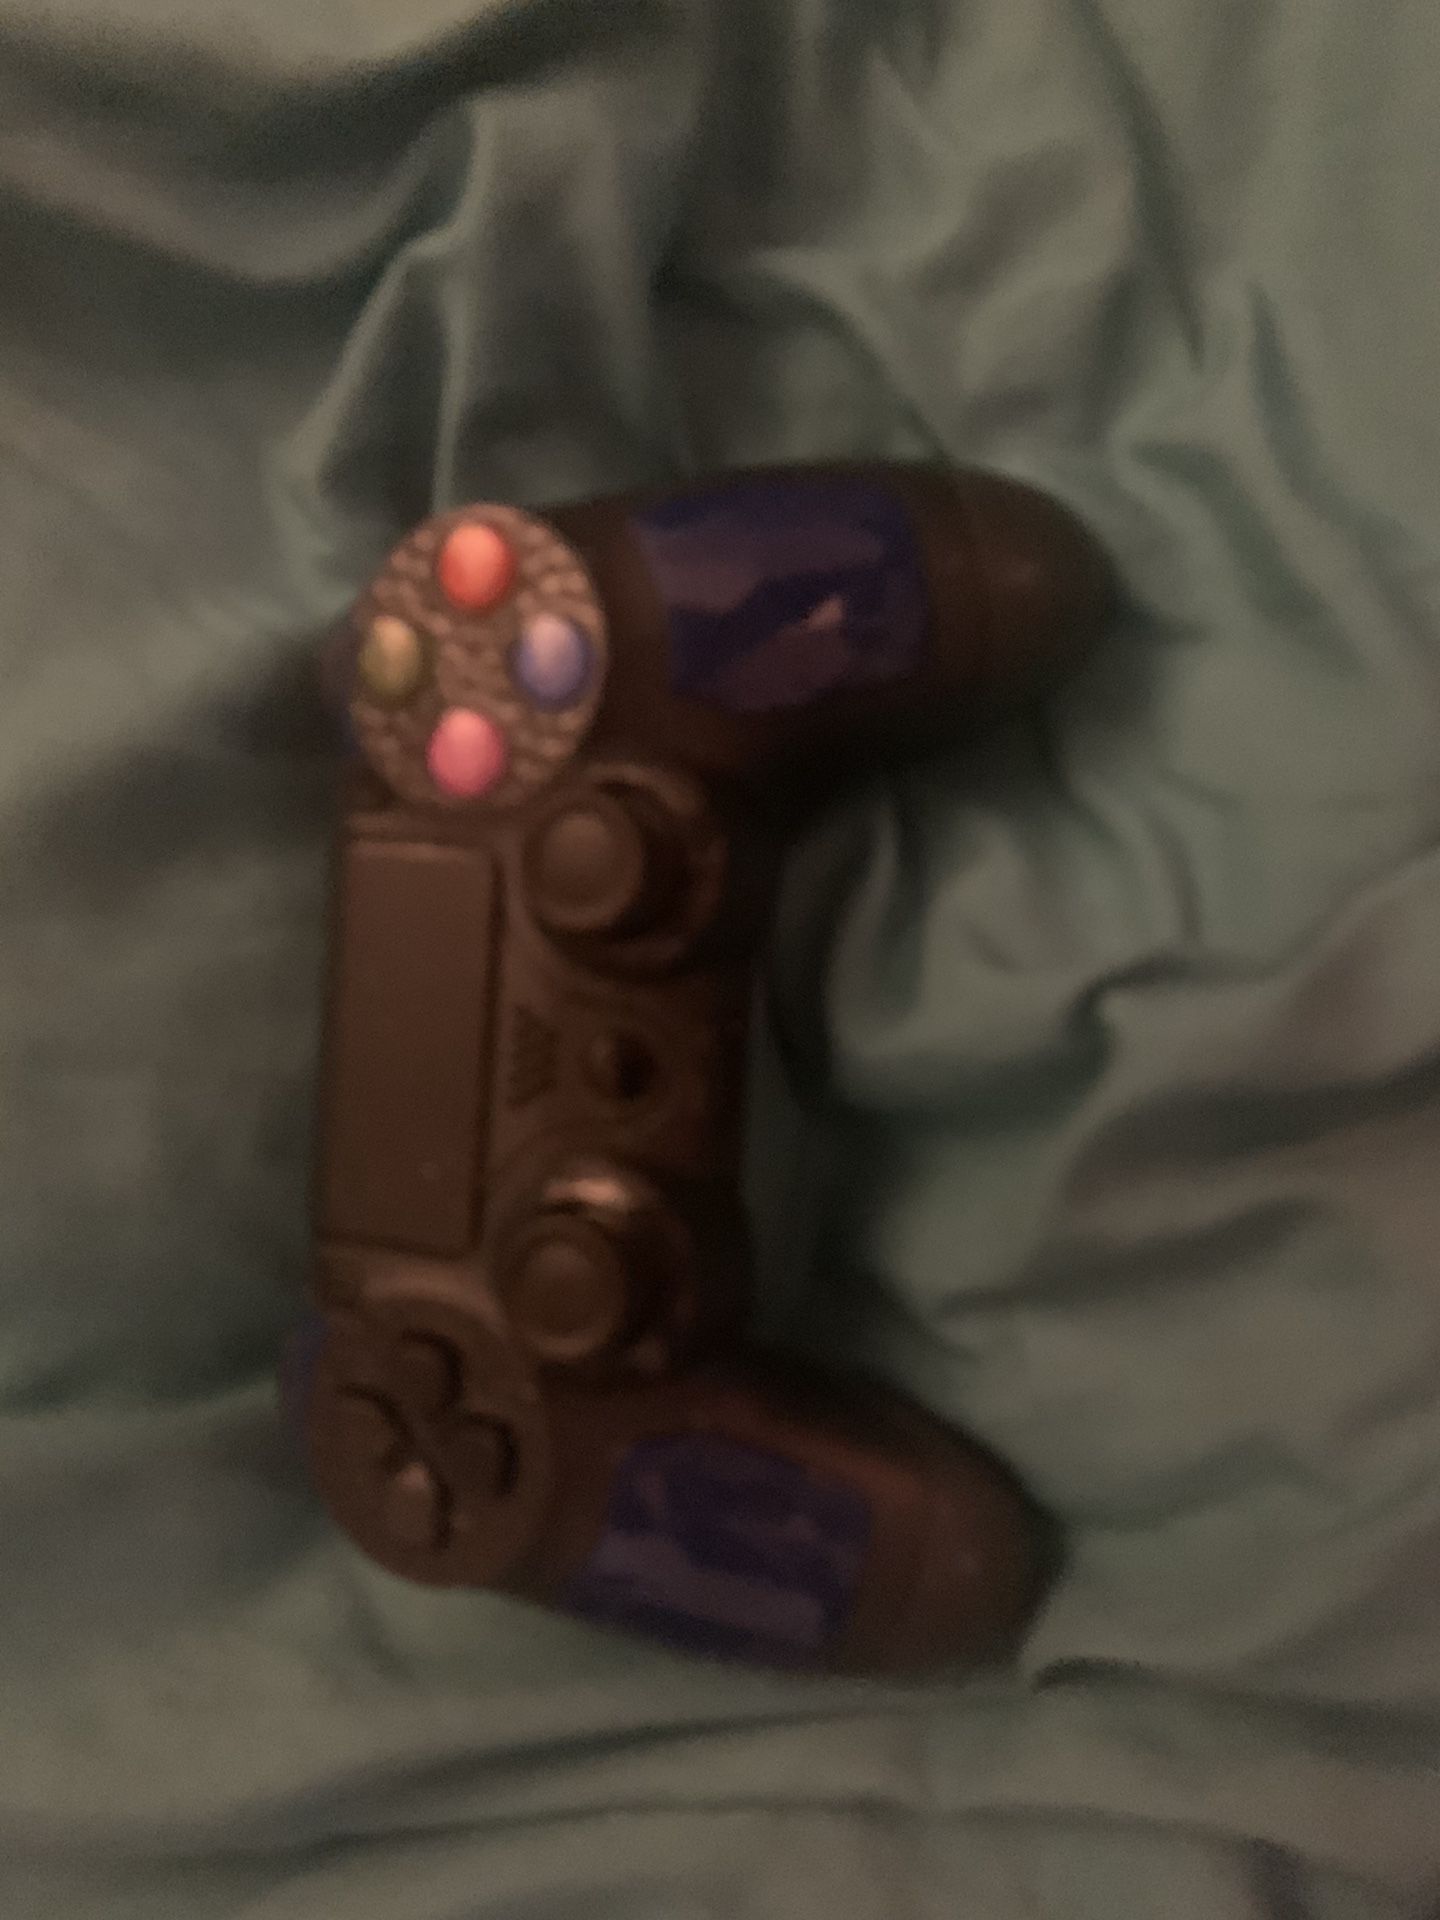 PS4 wireless game controller